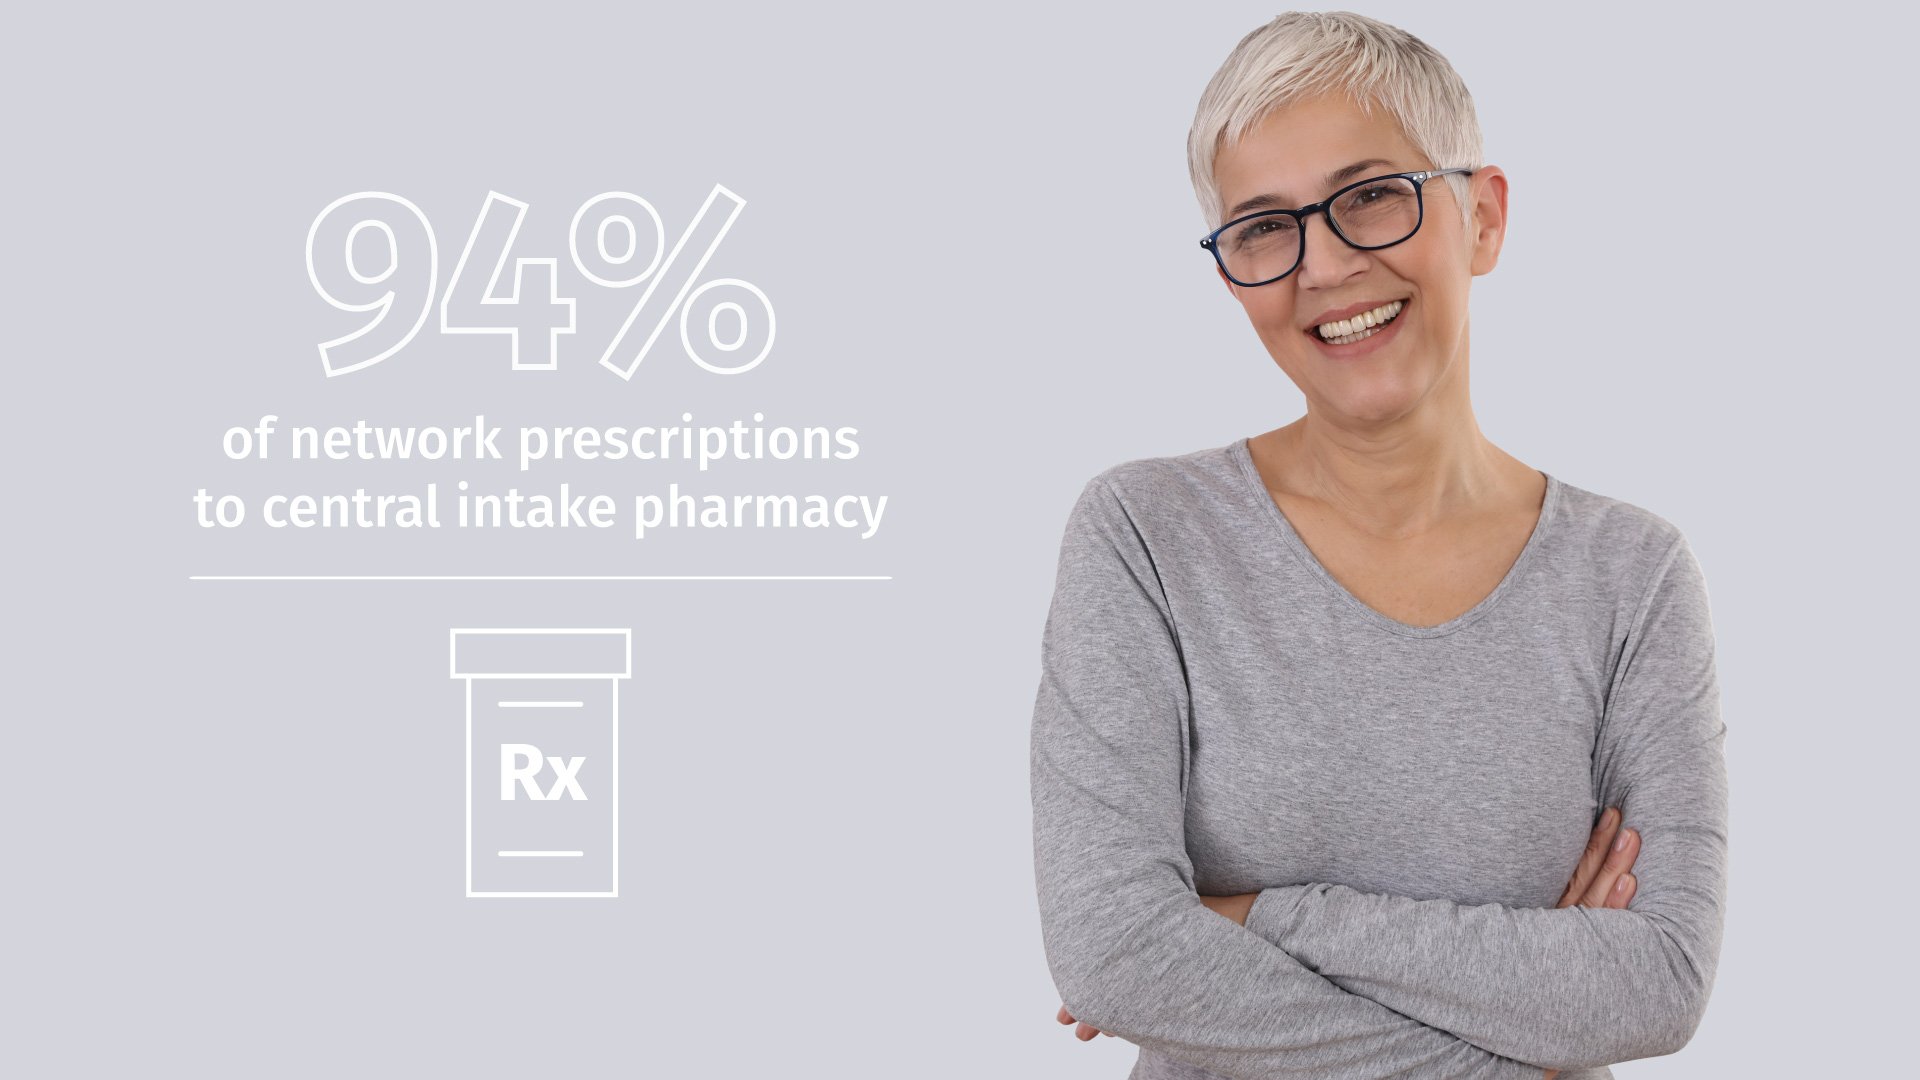 senior woman and text that says high percentage of network prescriptions to central intake pharmacy 